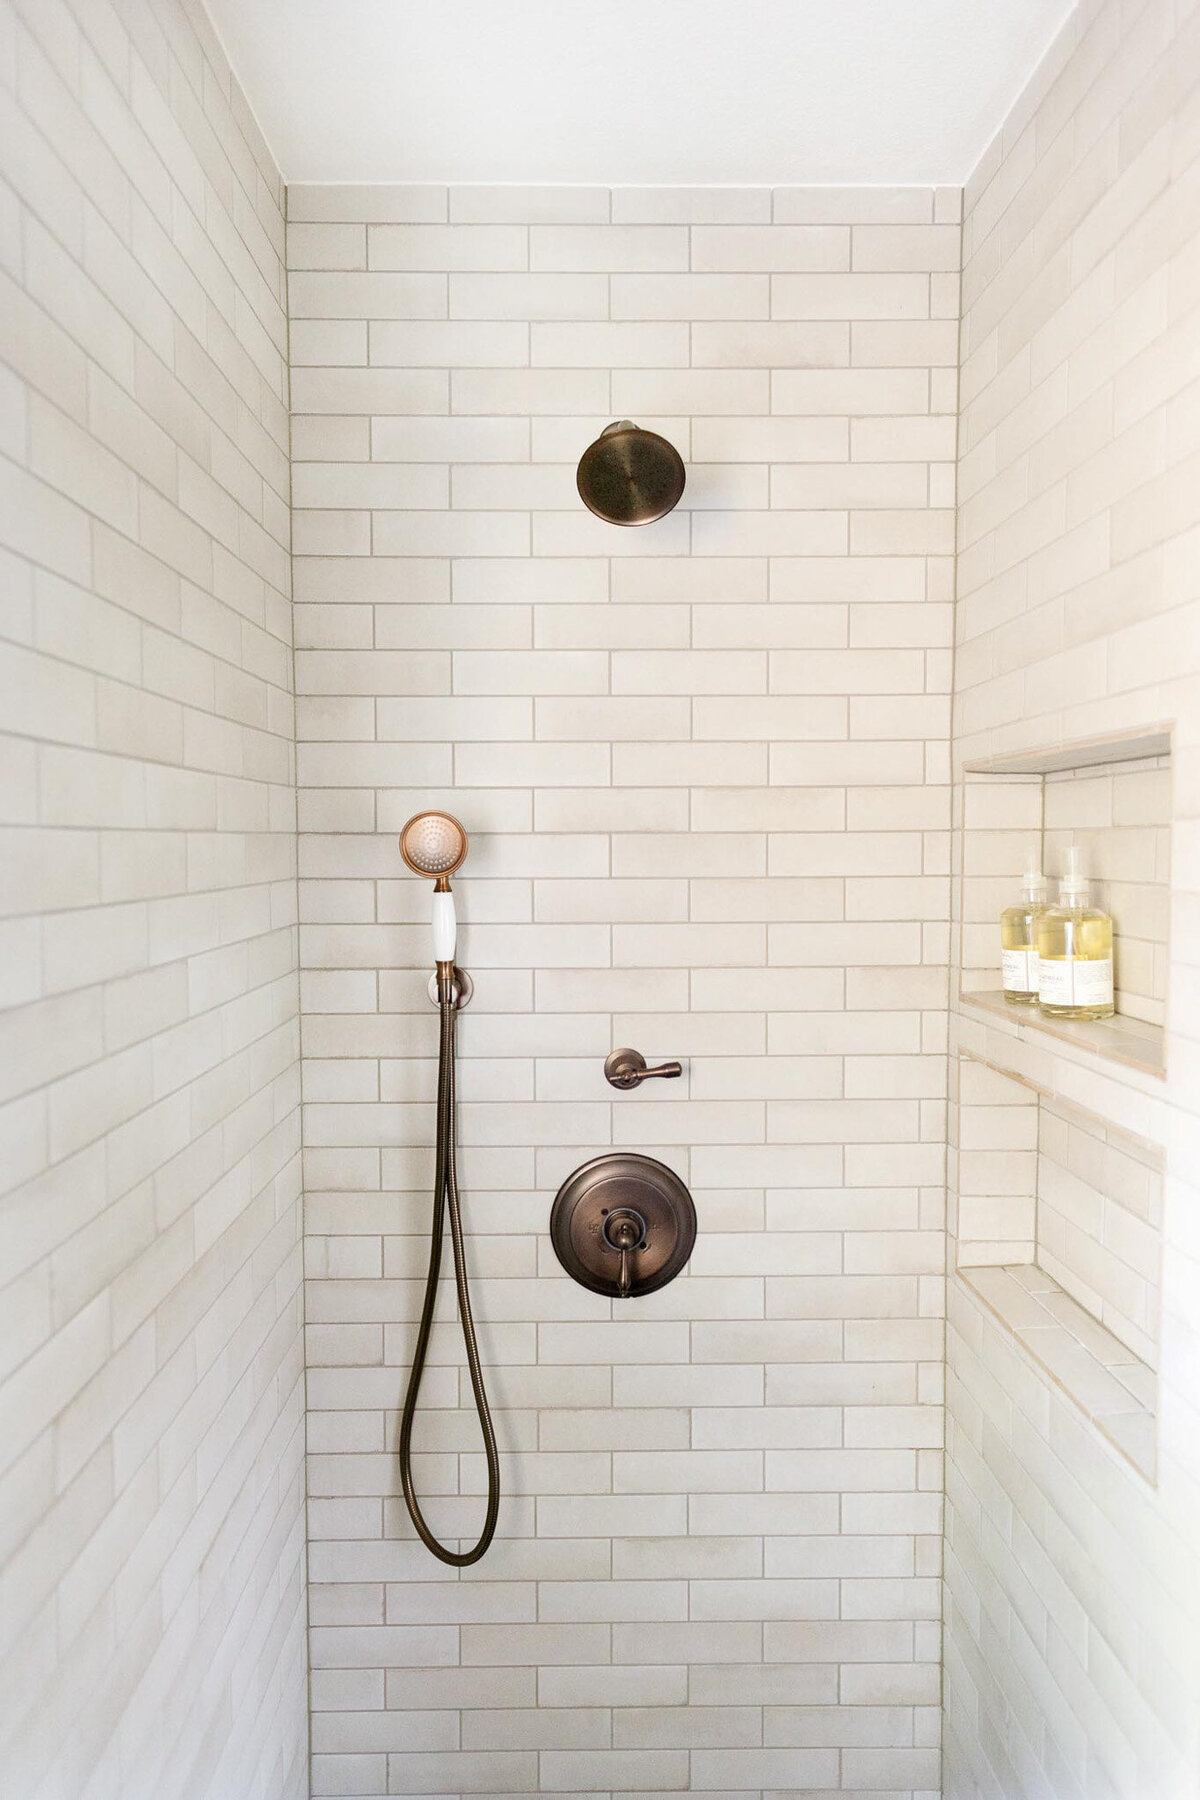 View of shower facing the shower head with off white subway tiles. Antique bronze shower fixtures with two valves, a shower head, and a handheld shower. Two niches on the wall to the right with soap bottles.